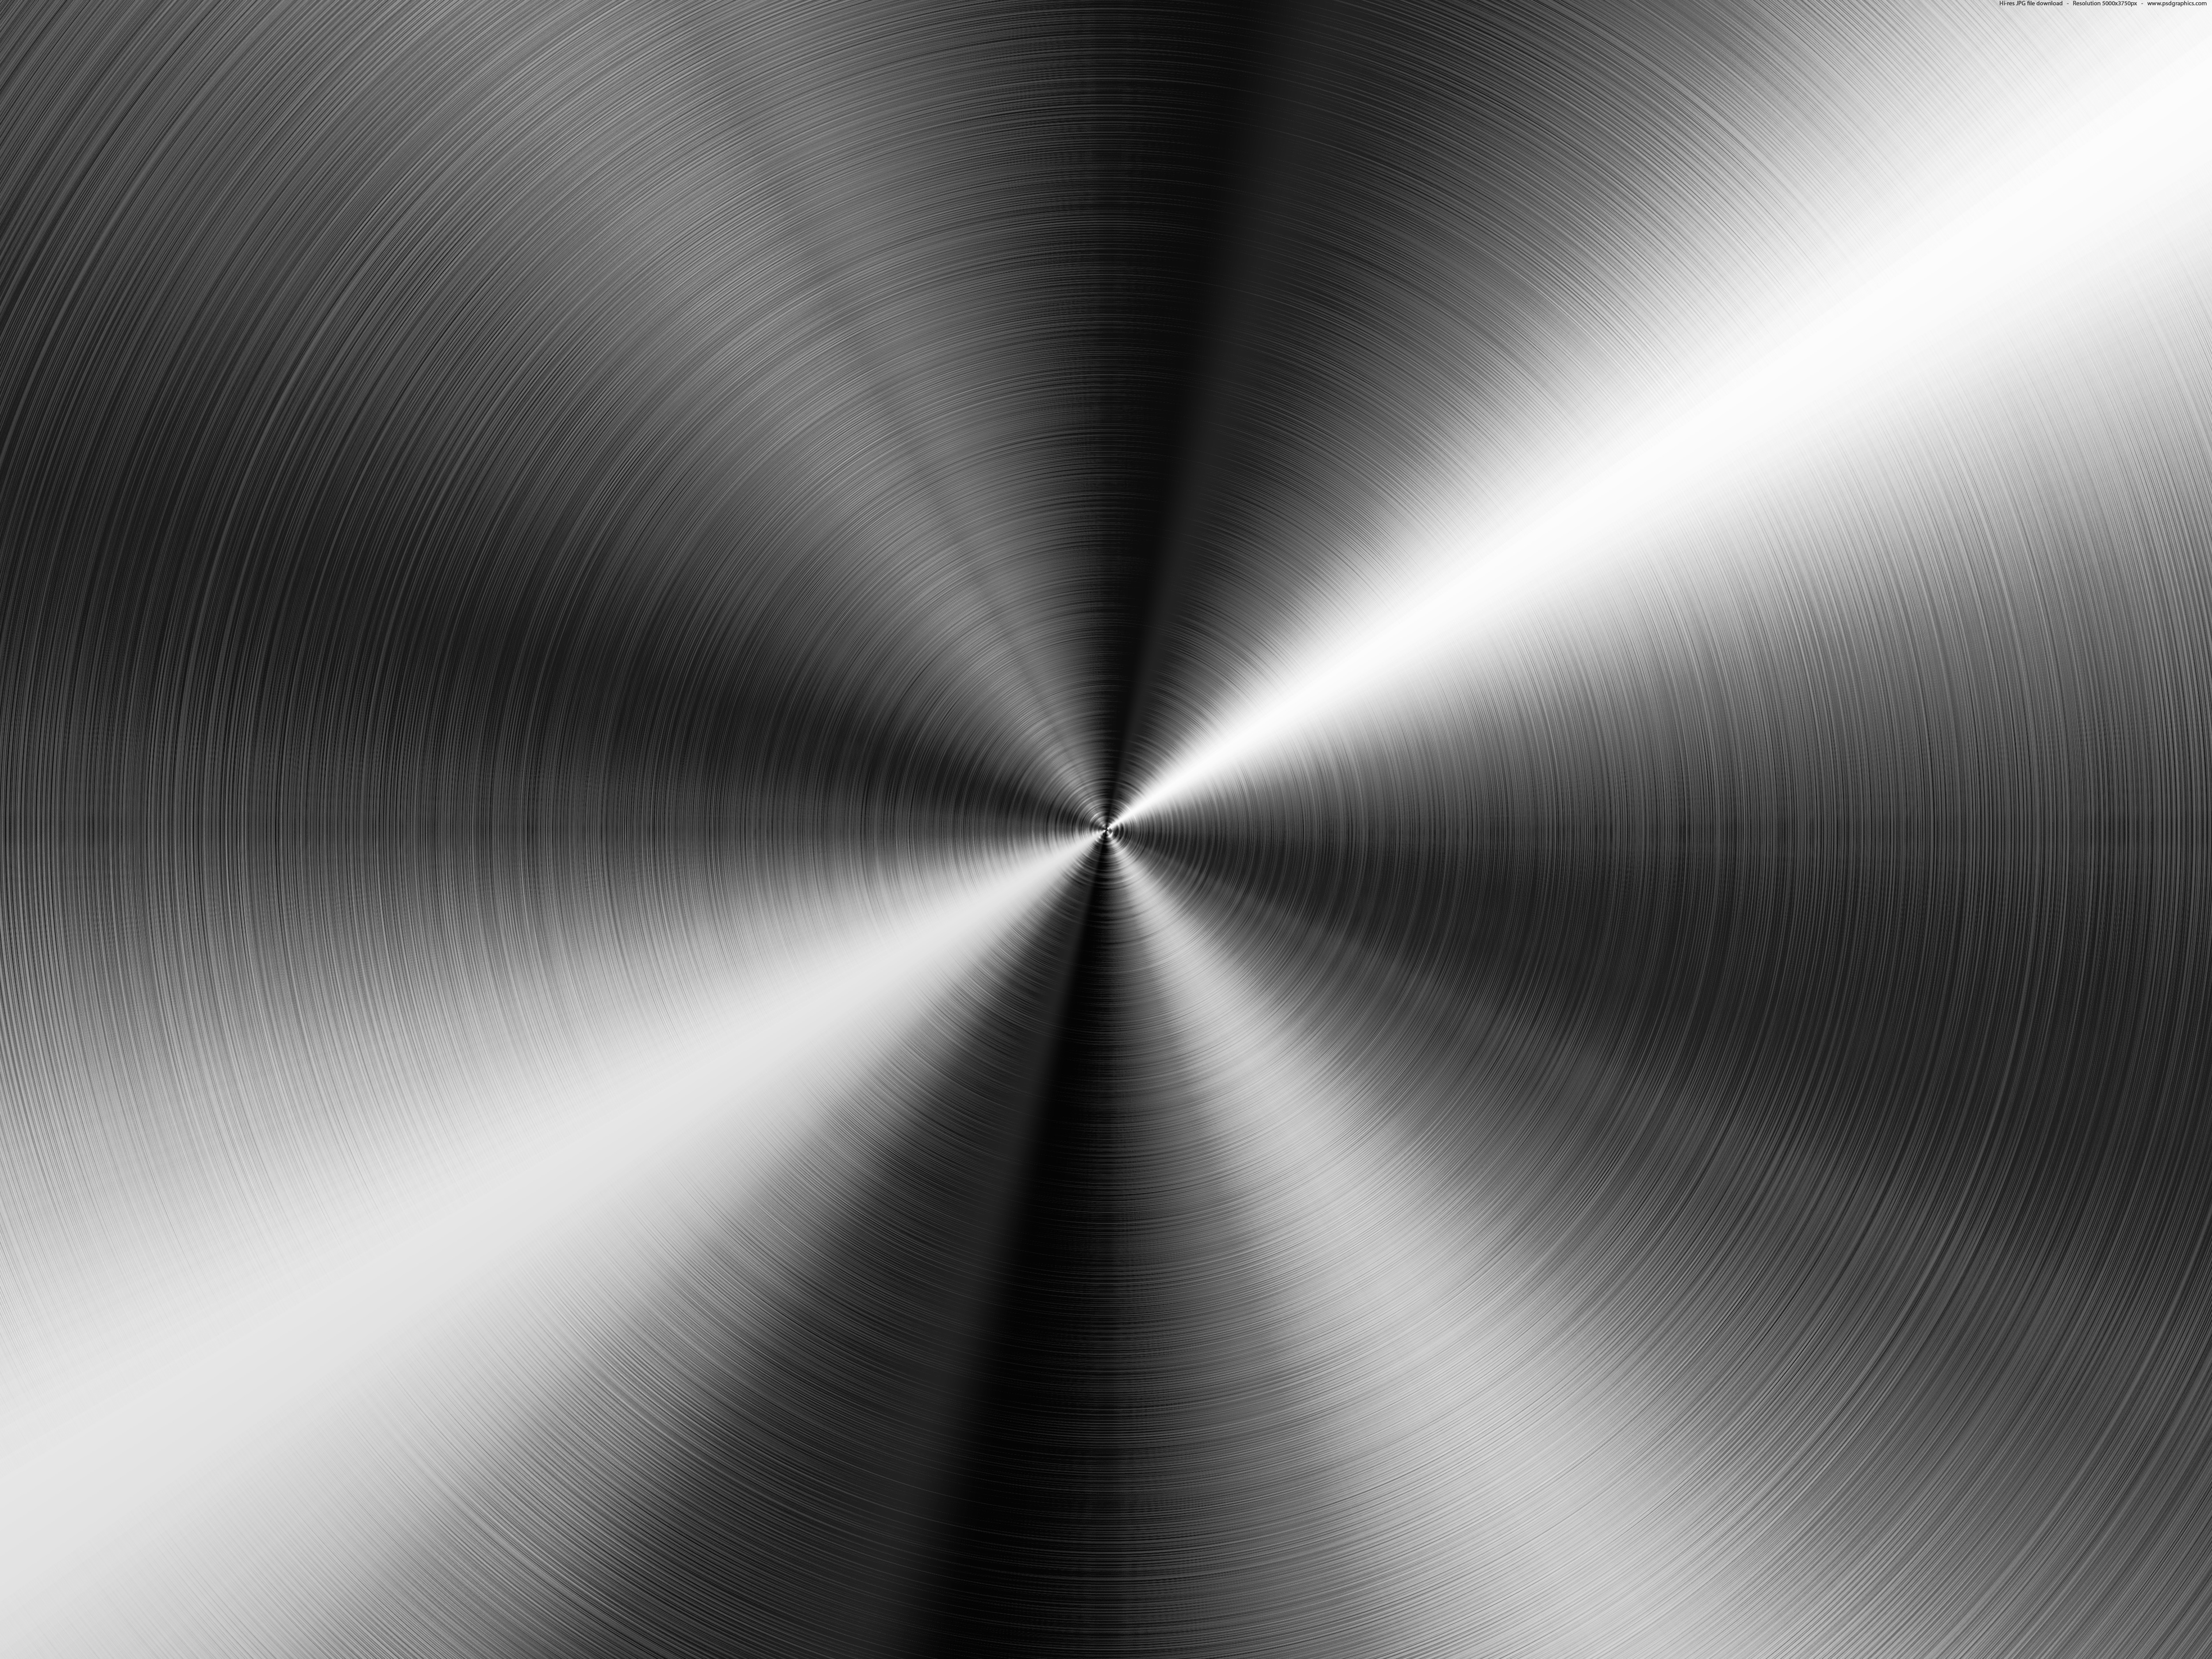 Radial Stainless Steel Background Psdgraphics